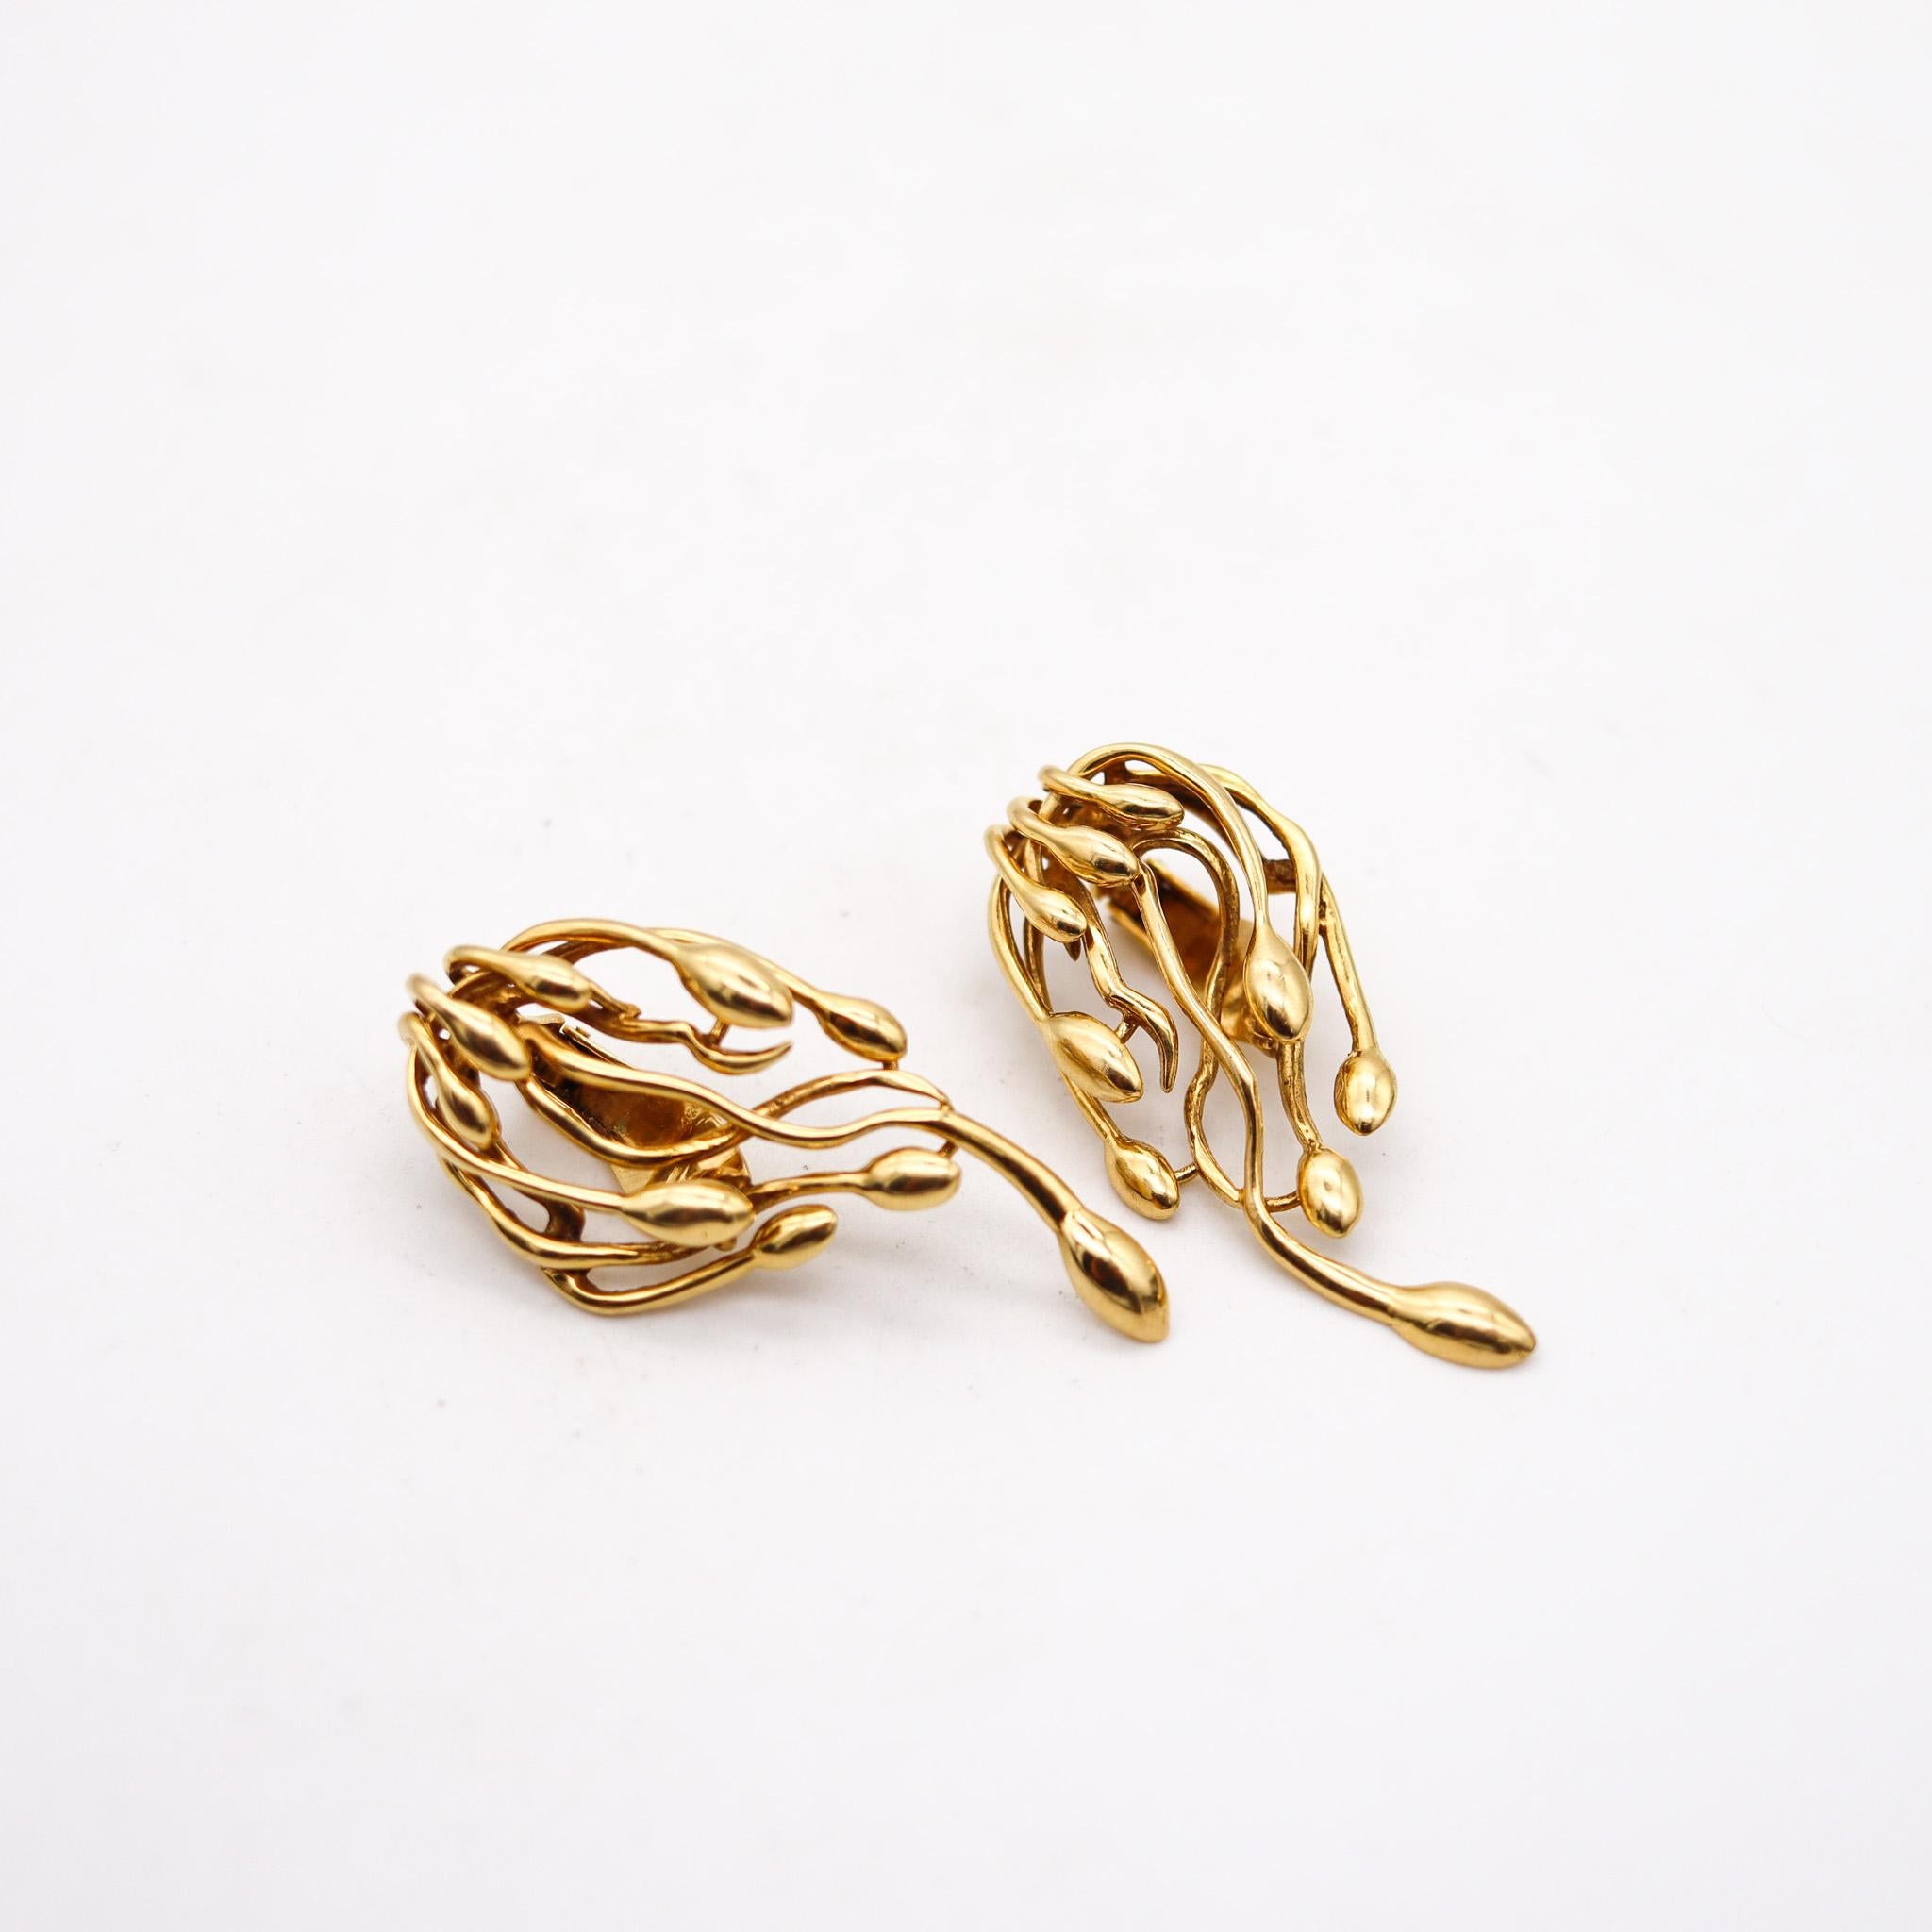 Modernist Lalaounis 1970 Paris Biosymbols Free Form Earrings In Solid 18Kt Yellow Gold